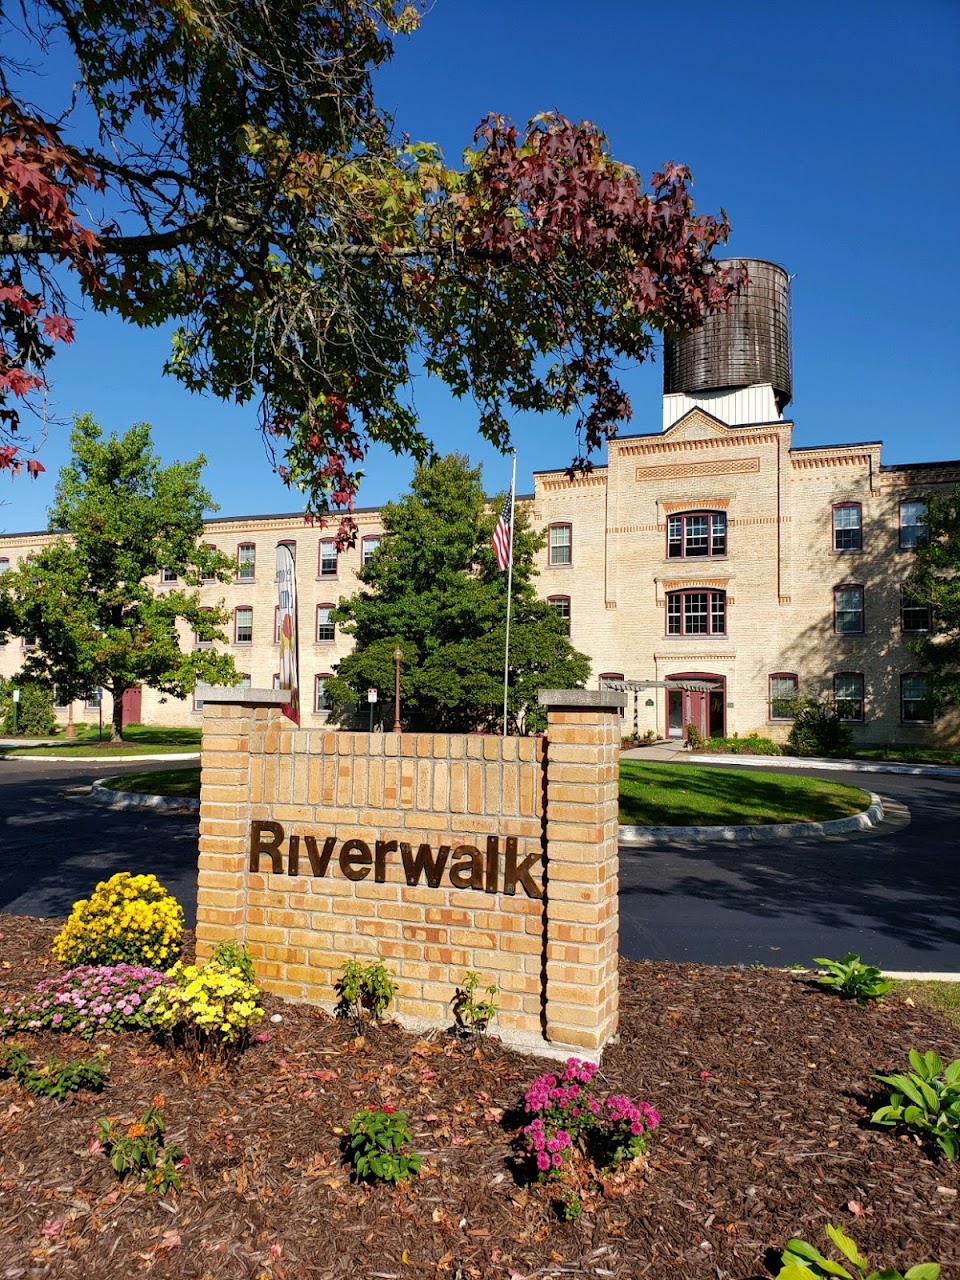 Photo of RIVERWALK APTS (GRAND LEDGE). Affordable housing located at 101 PERRY ST GRAND LEDGE, MI 48837